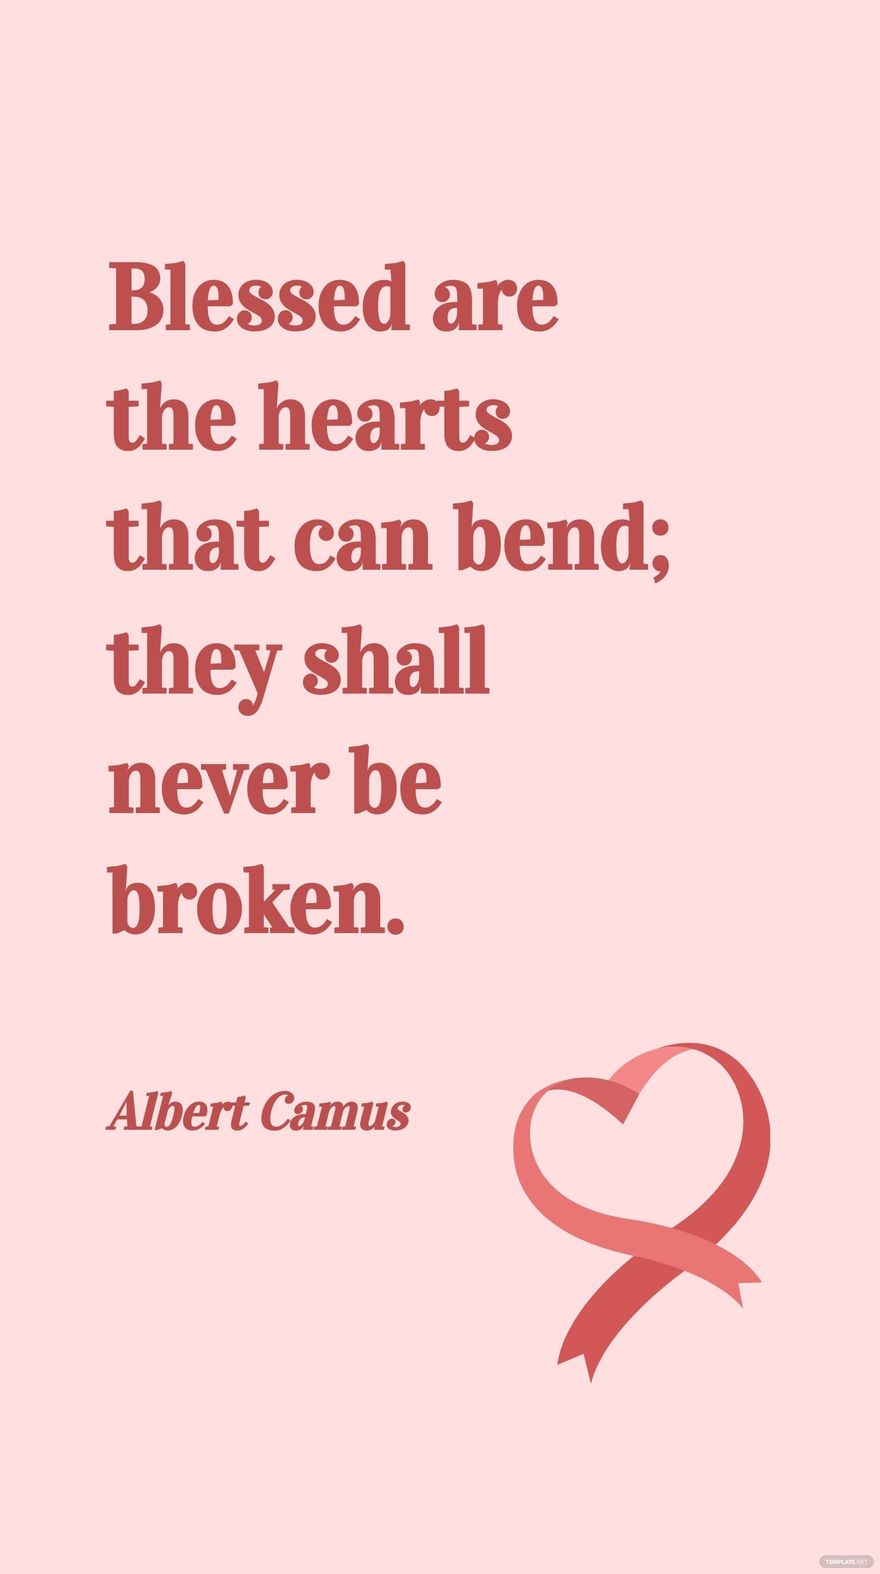 Albert Camus - Blessed are the hearts that can bend; they shall never be broken. in JPG